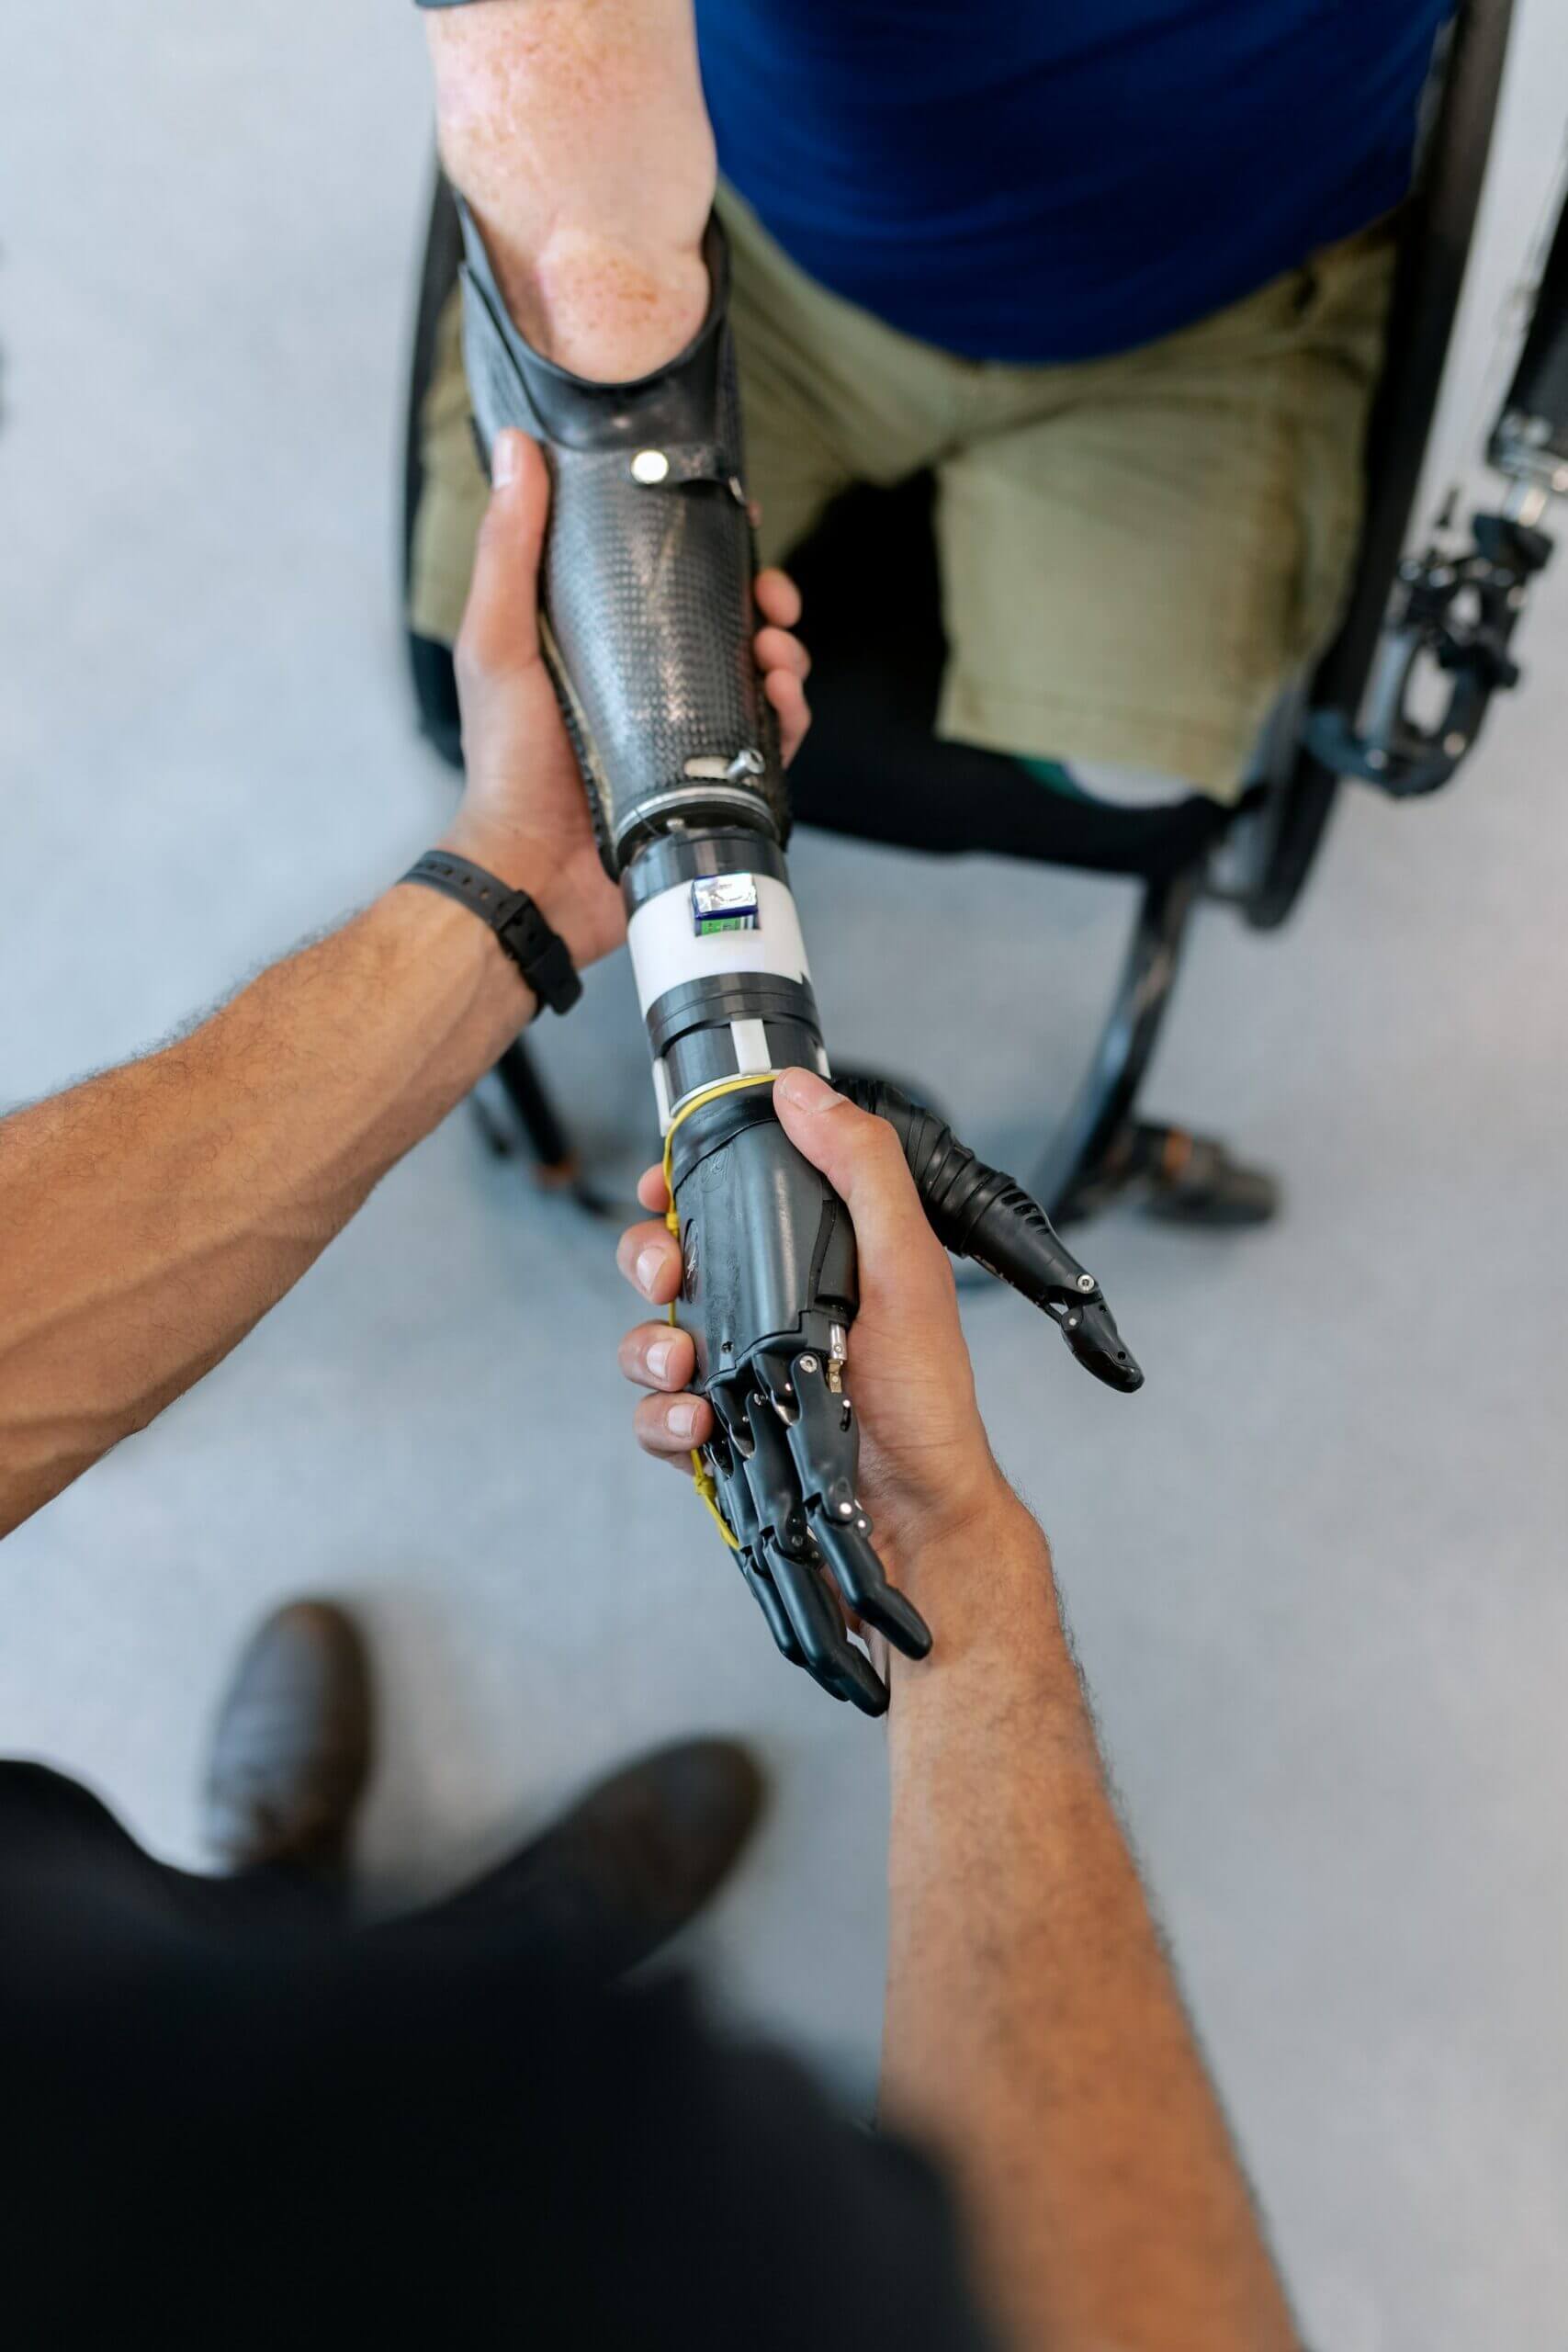 Amputee being fitted a robotic hand